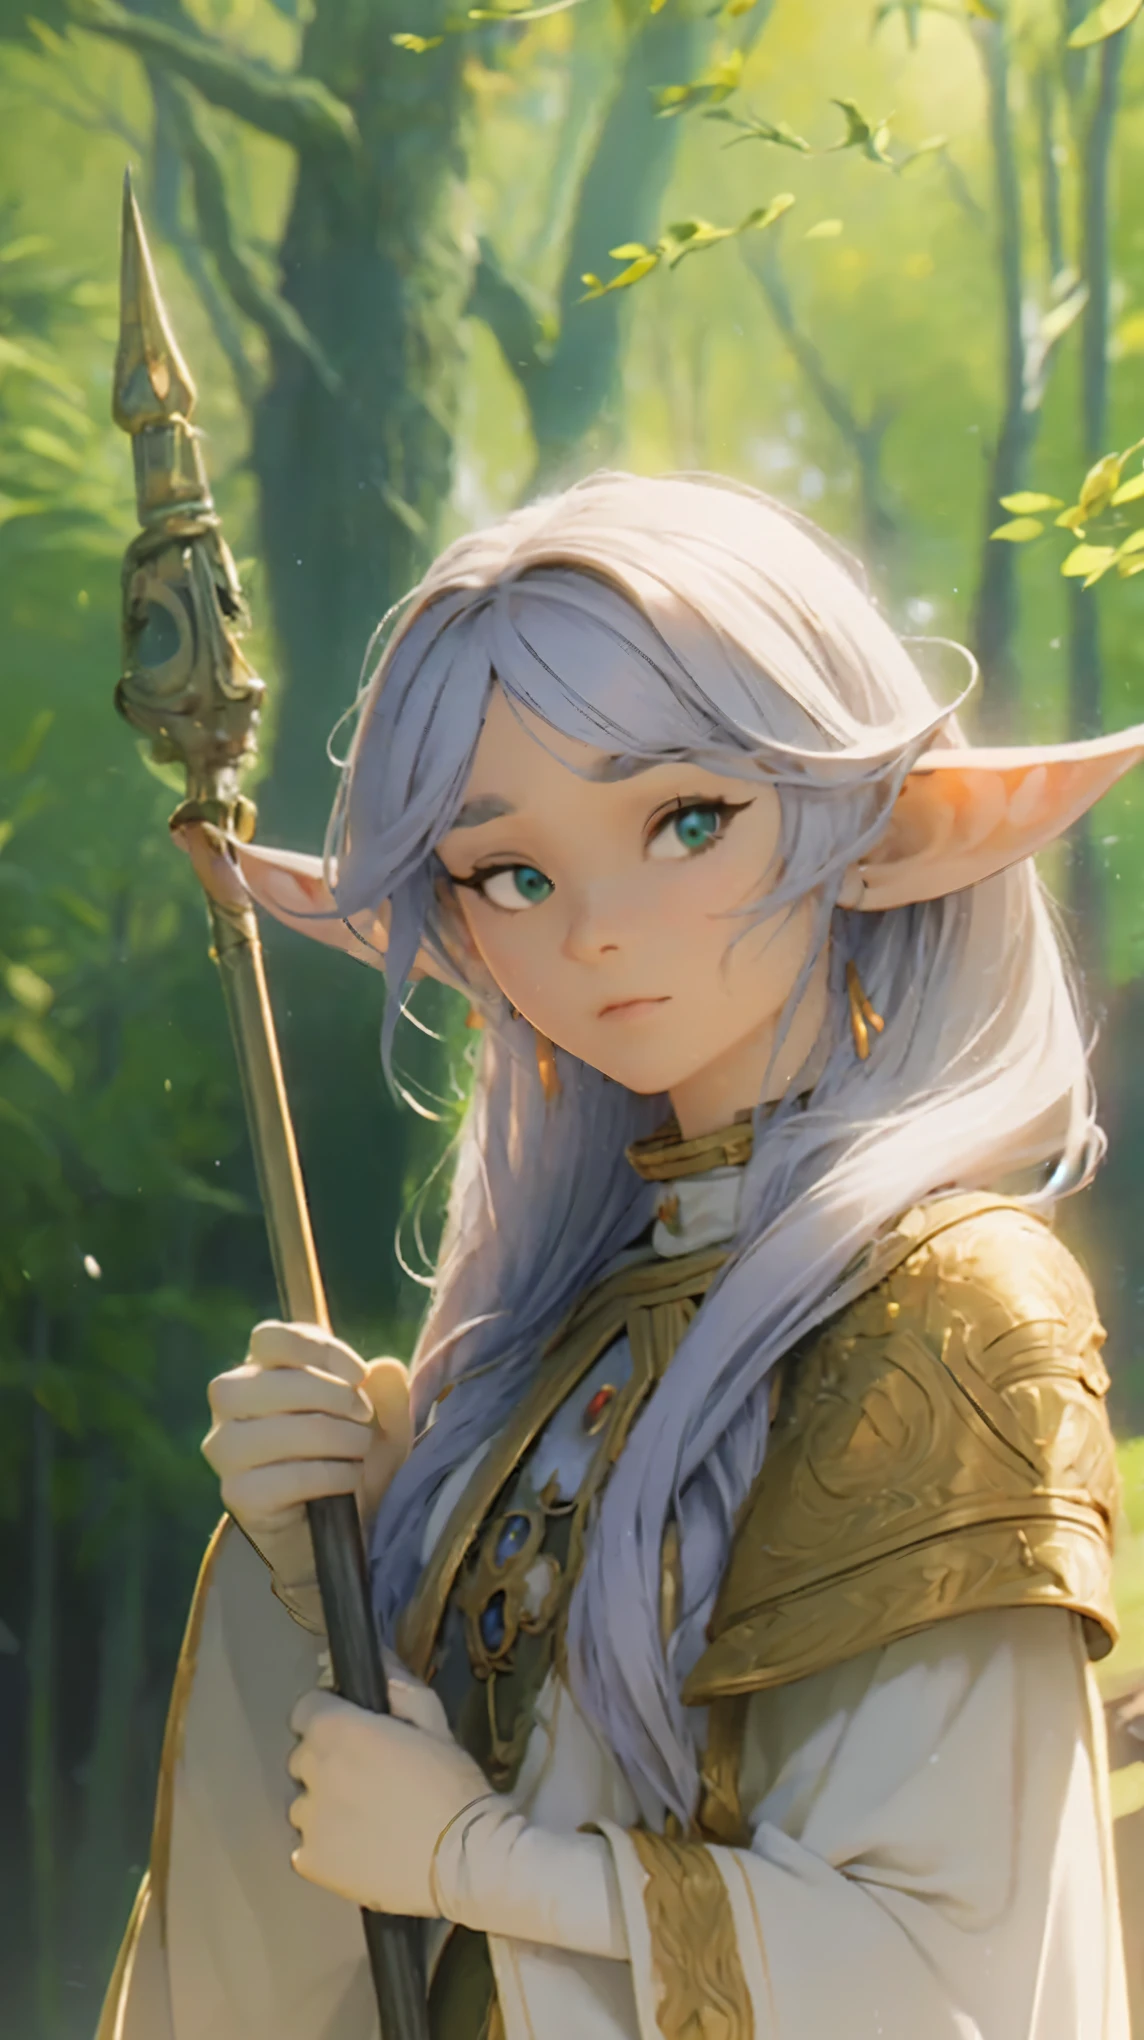 (best quality,4k,highres,masterpiece:1.2),ultra-detailed,realistic, anatomically correct，frieren，front view，detailed eyes,detailed lips,long eyelashes,beautiful girl,fantasy theme,enchanted forest,magical atmosphere,morning light,fairy tale,soft color palette,natural elements,mossy trees,whimsical creatures, ethereal glow,mystical staff,flowing robes,delicate features,wavy hair,rays of sunlight,serene expression,positional light,subtle shadows,artistic brushstrokes,dreamlike texture,depth and dimension,impressive level of detail,radiant beauty,vivid colors,fantasy world,peaceful ambiance，